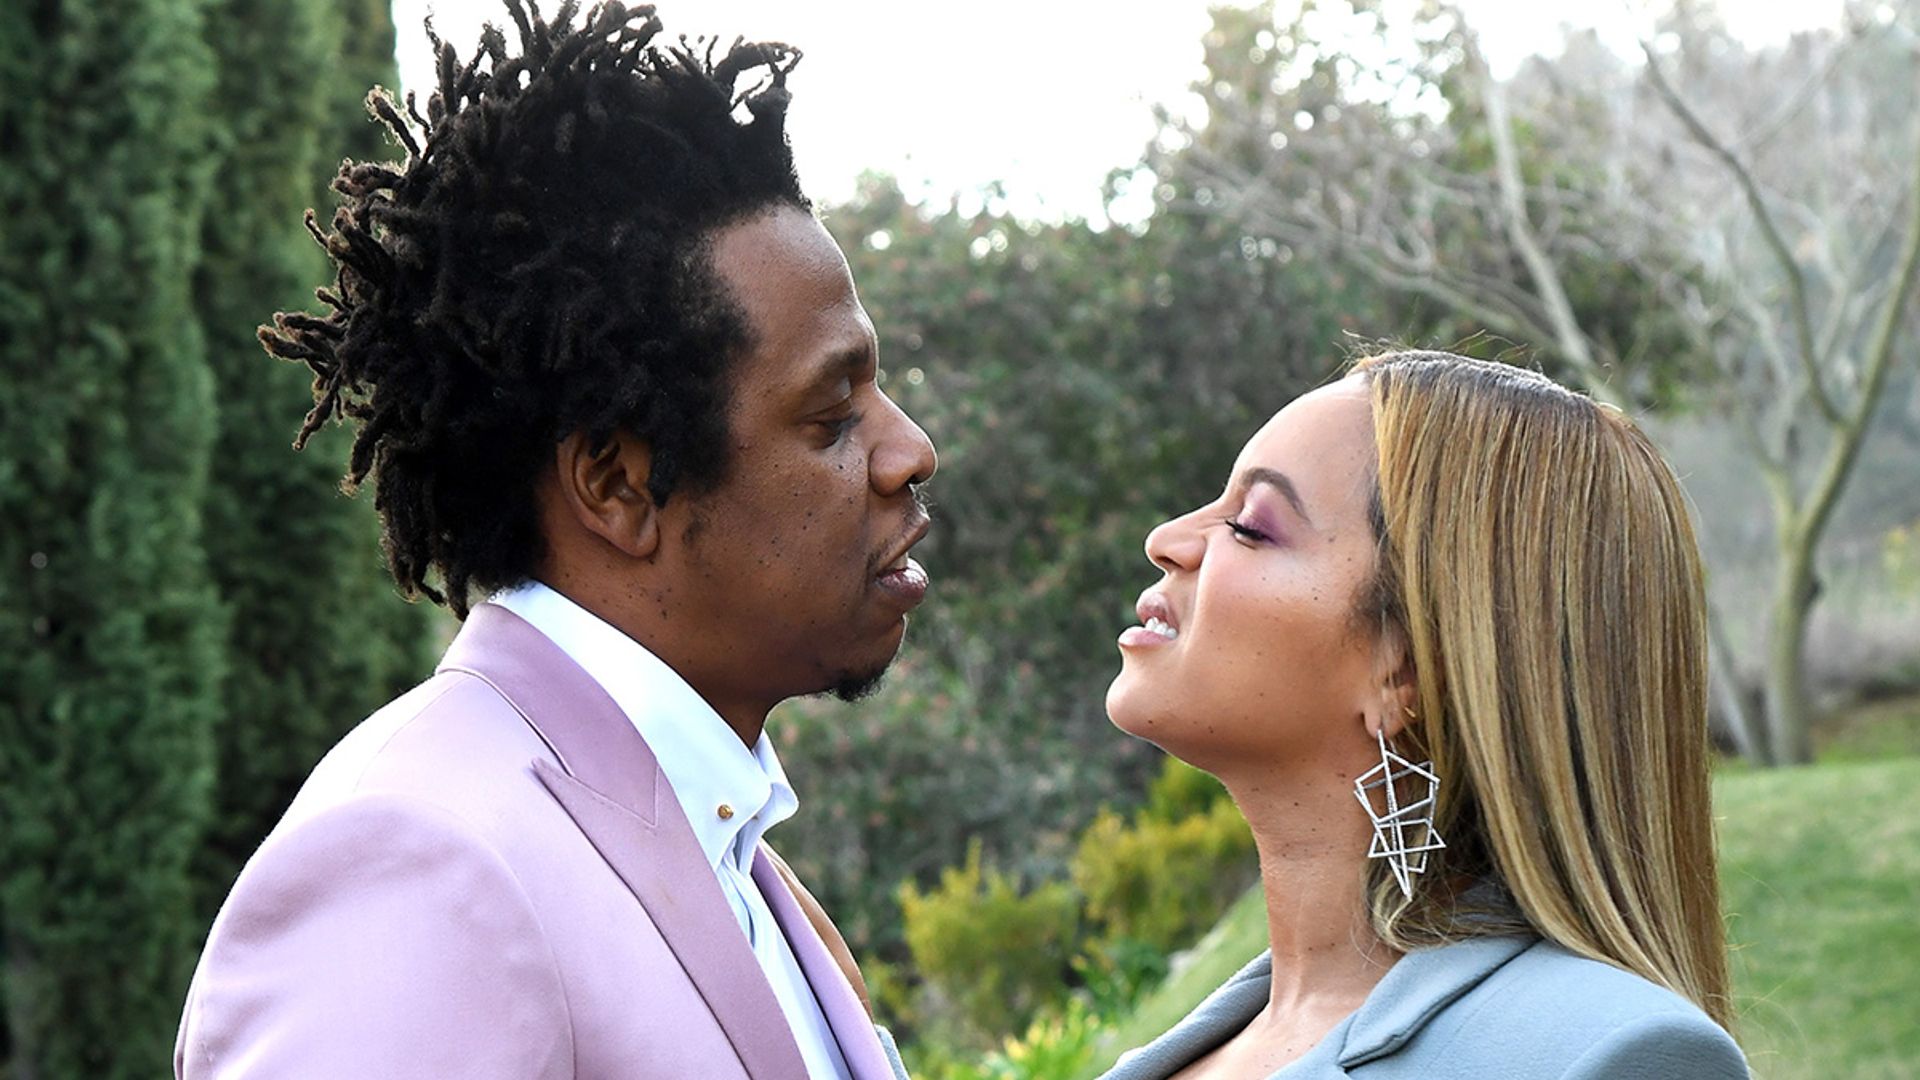 Has Beyoncé upgraded her $5m engagement ring from husband Jay-Z?